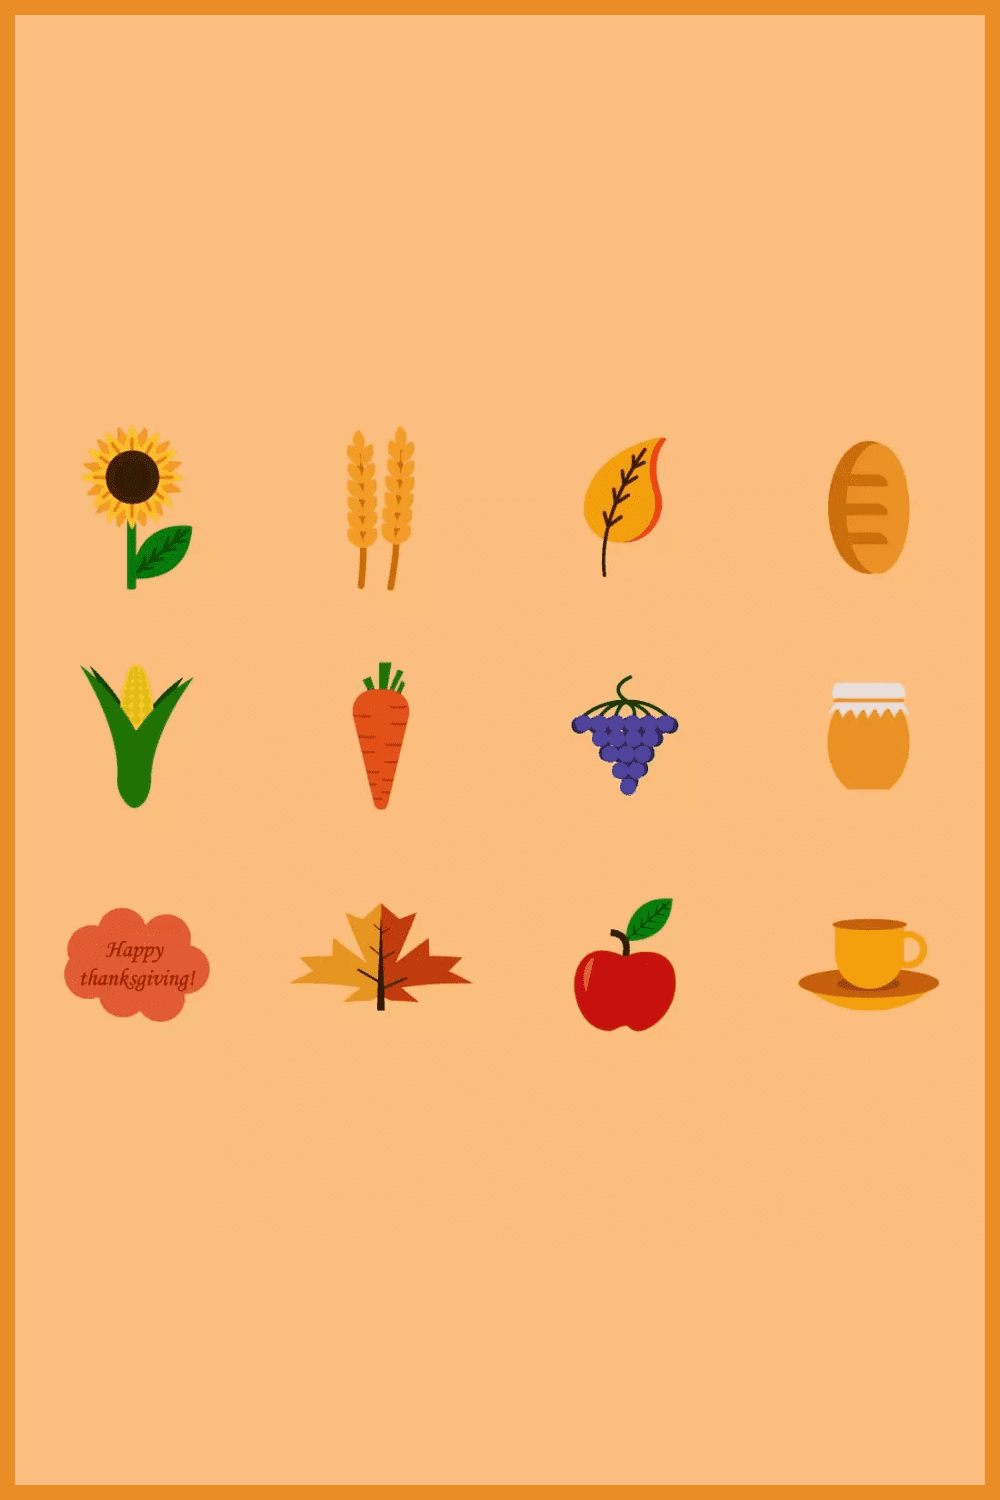 Collage of images of fruits and vegetables on an orange background.